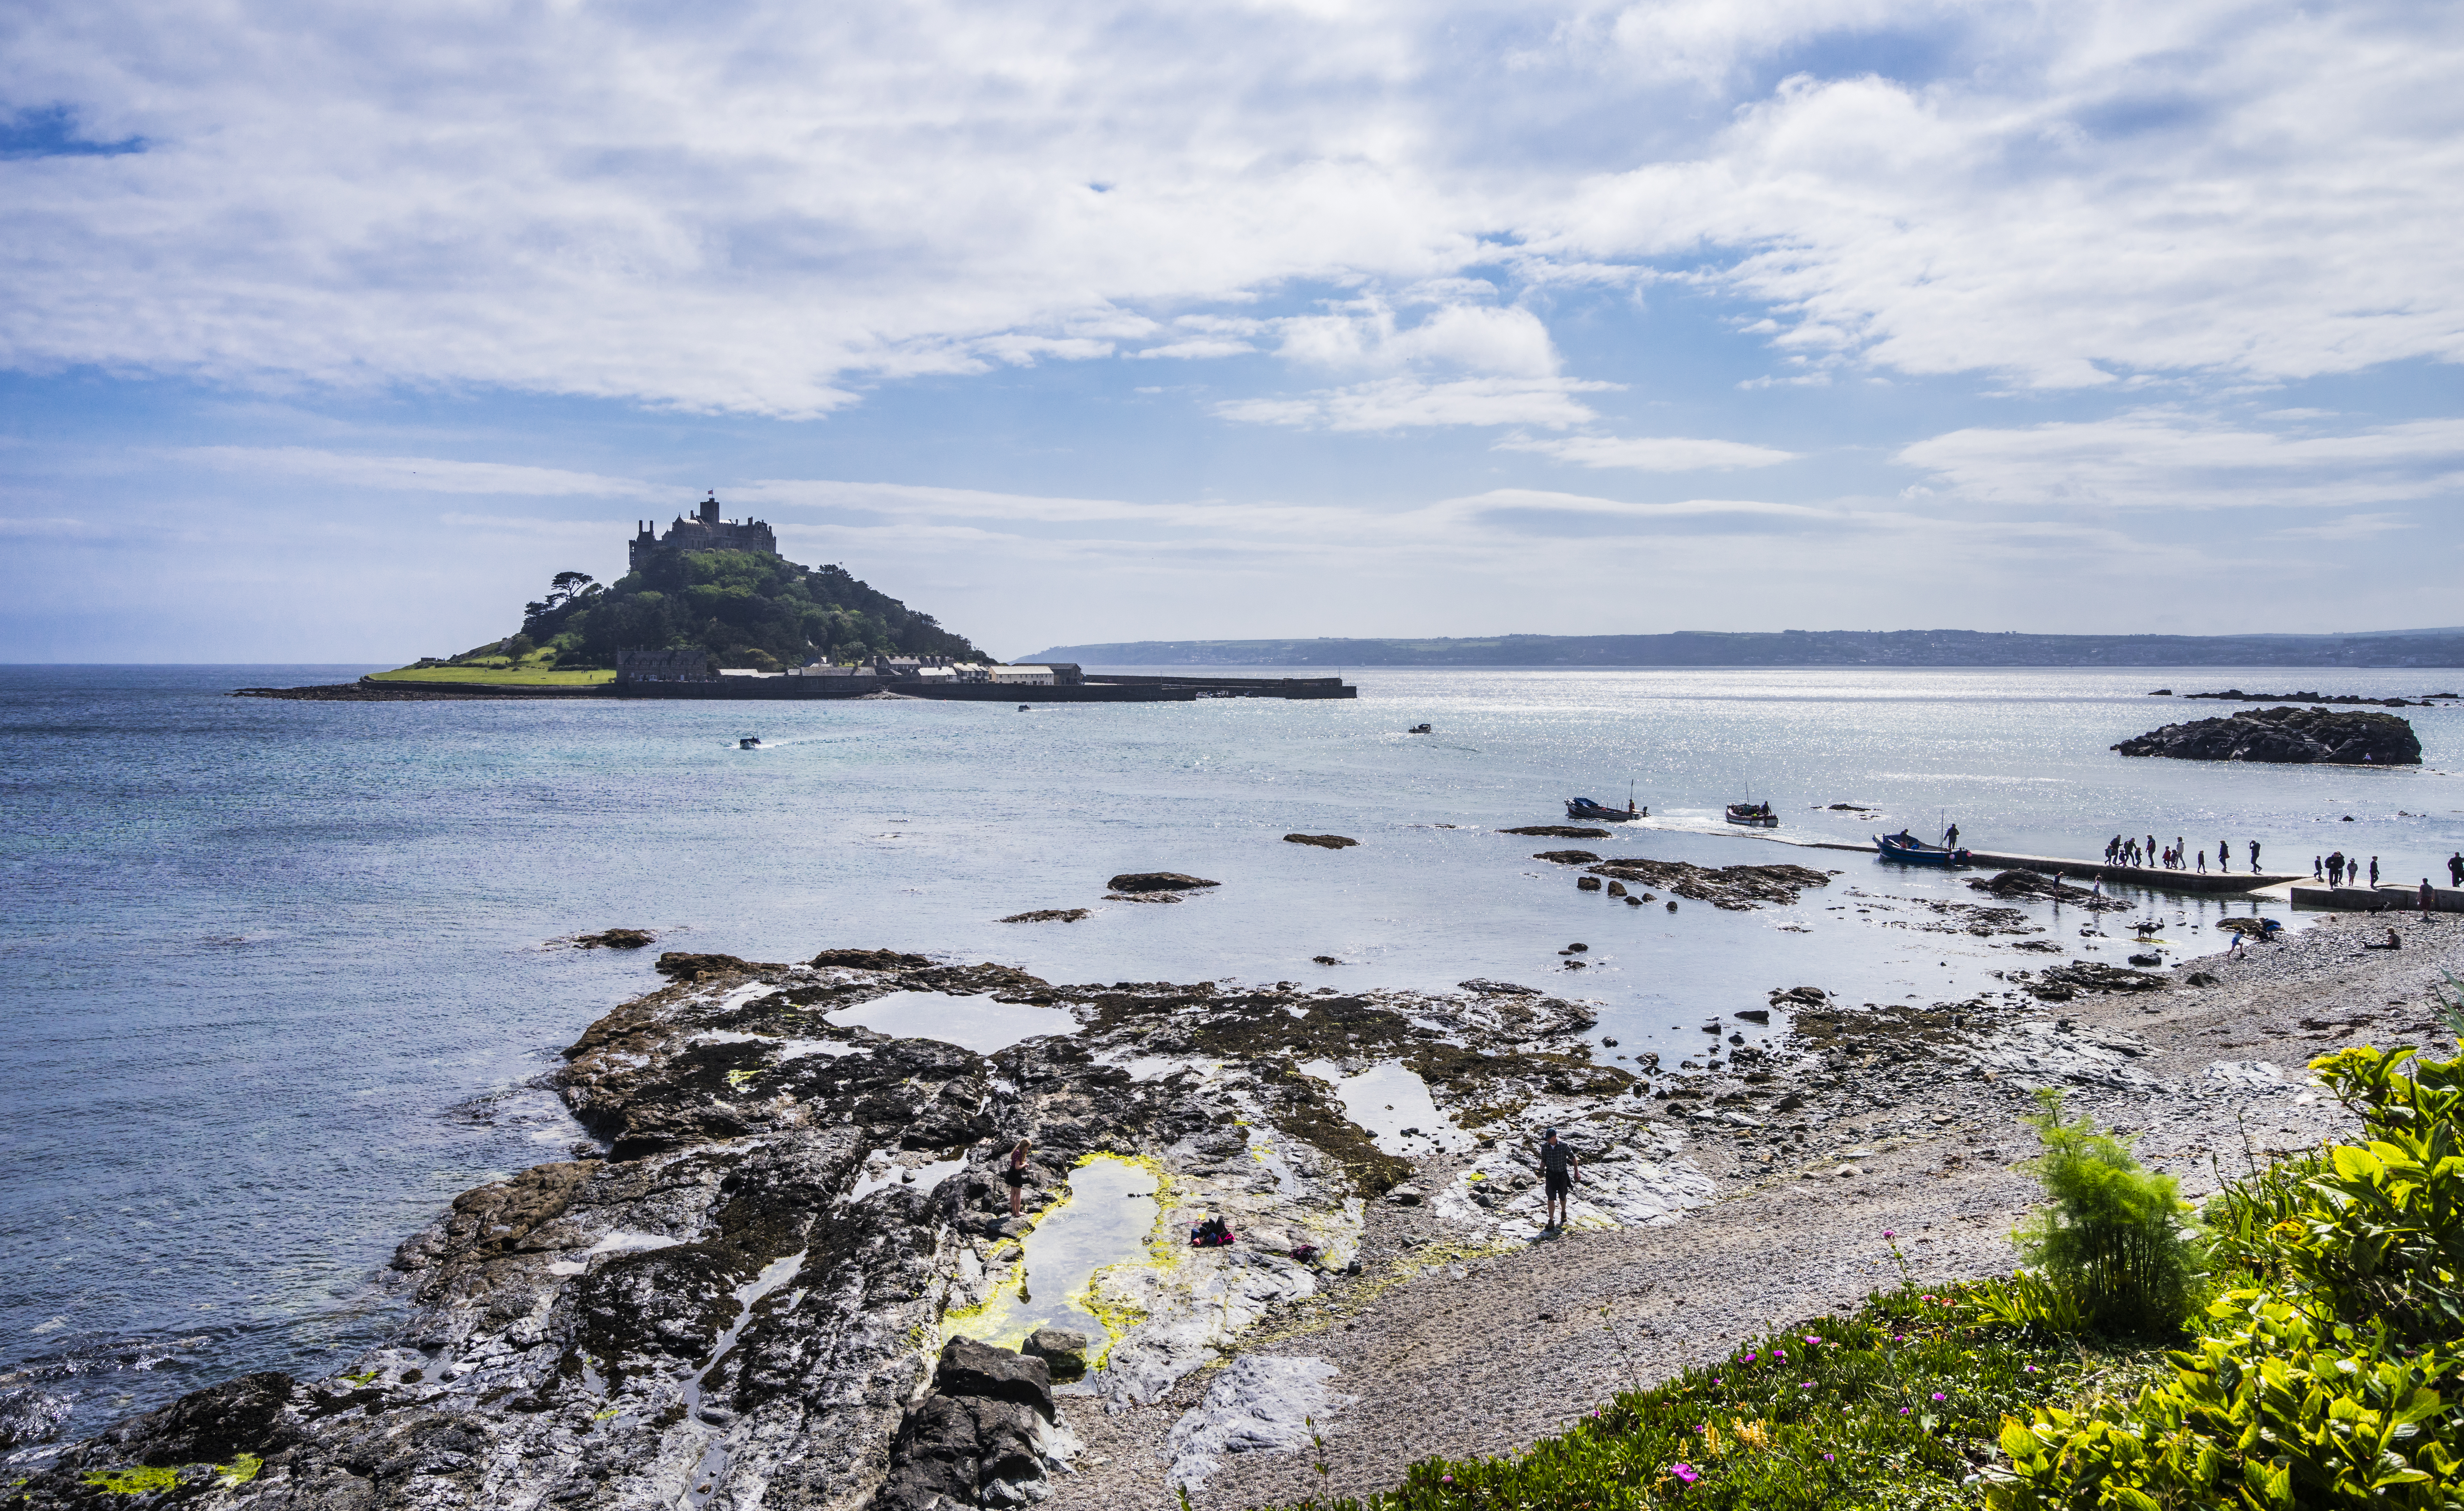 St. Michael's Mount in Mount's Bay, Cornwall, England. | Source: Getty Images